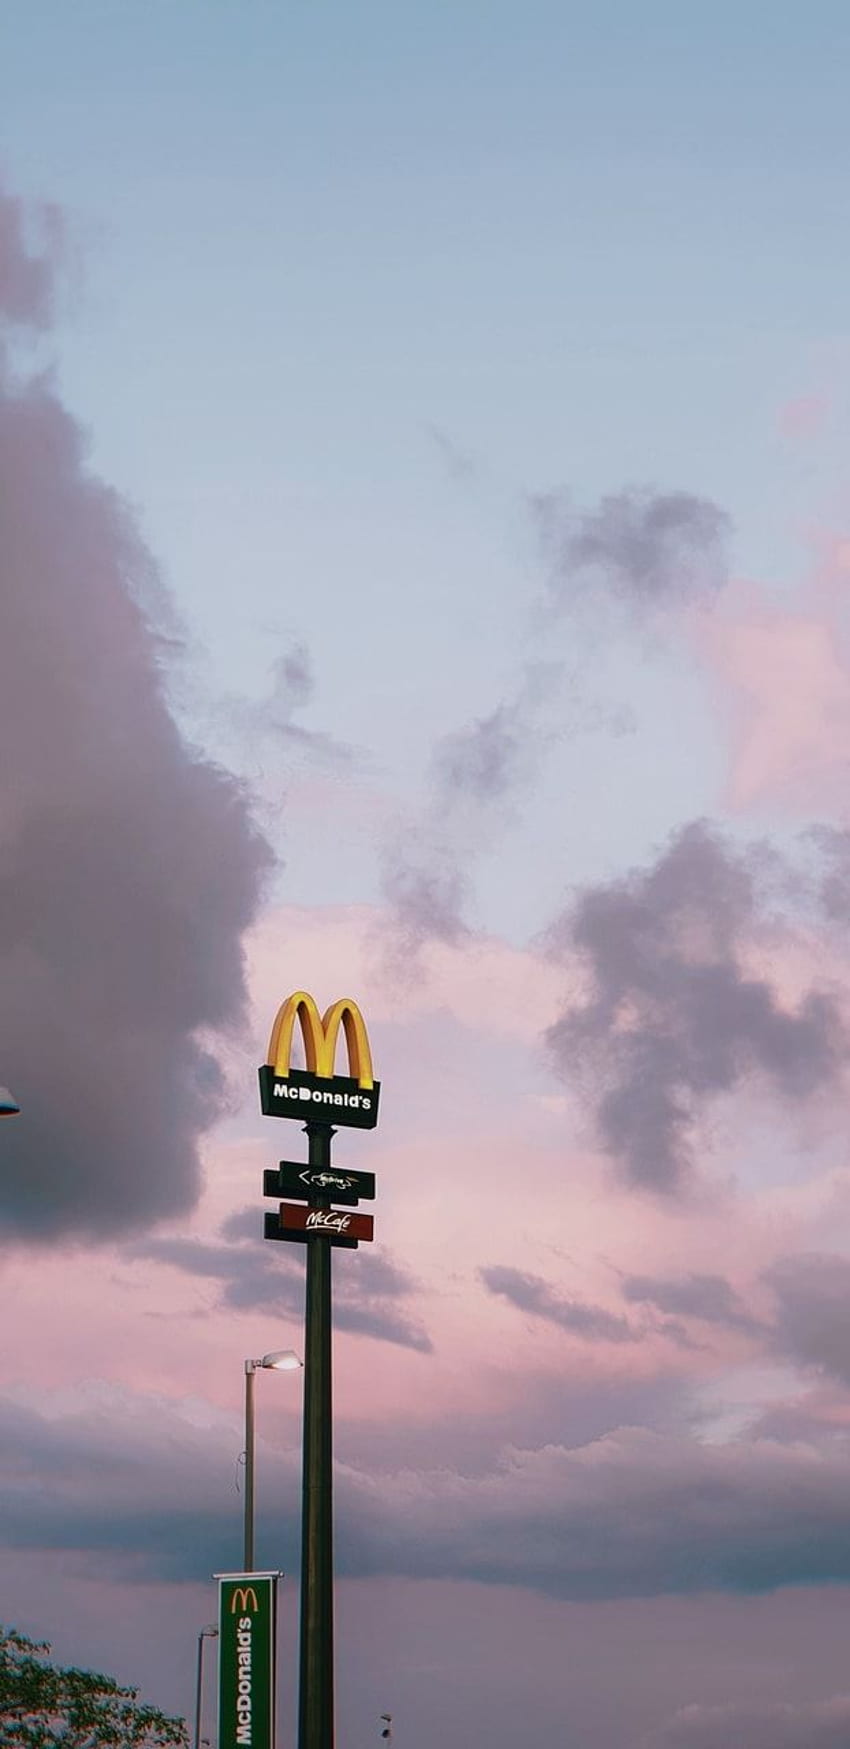 McDonald's, aesthetic, clouds and grunge -, Aesthetic McDonal's HD phone wallpaper